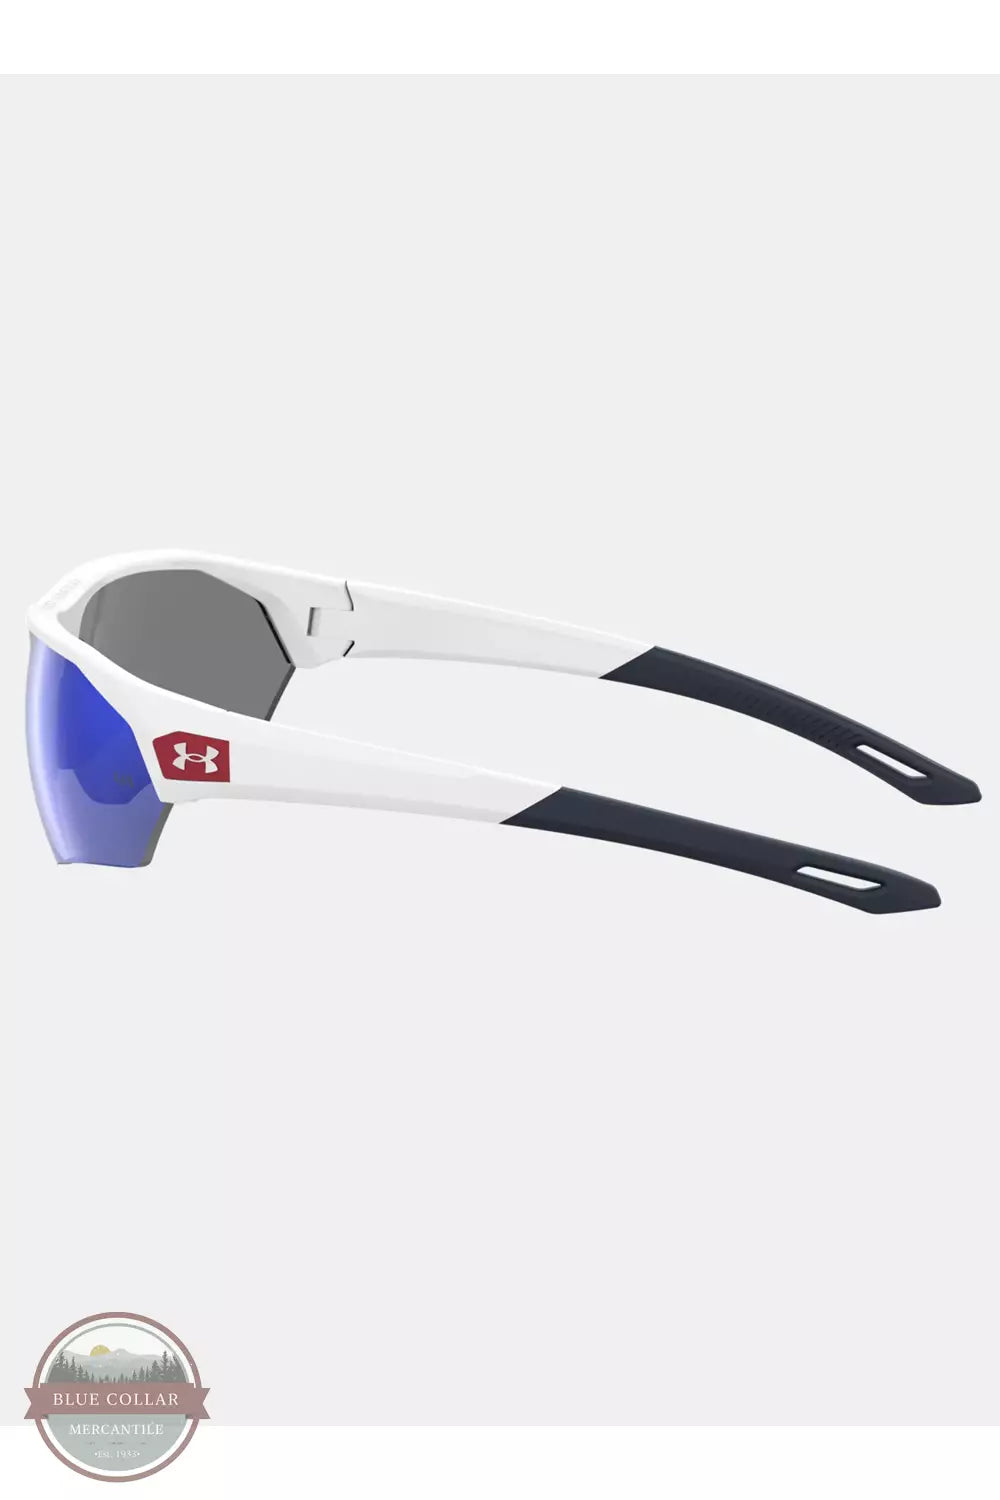 Under Armour 1368157-982 TUNED Playmaker Sunglasses in Matte White / Shiny Silver Side View